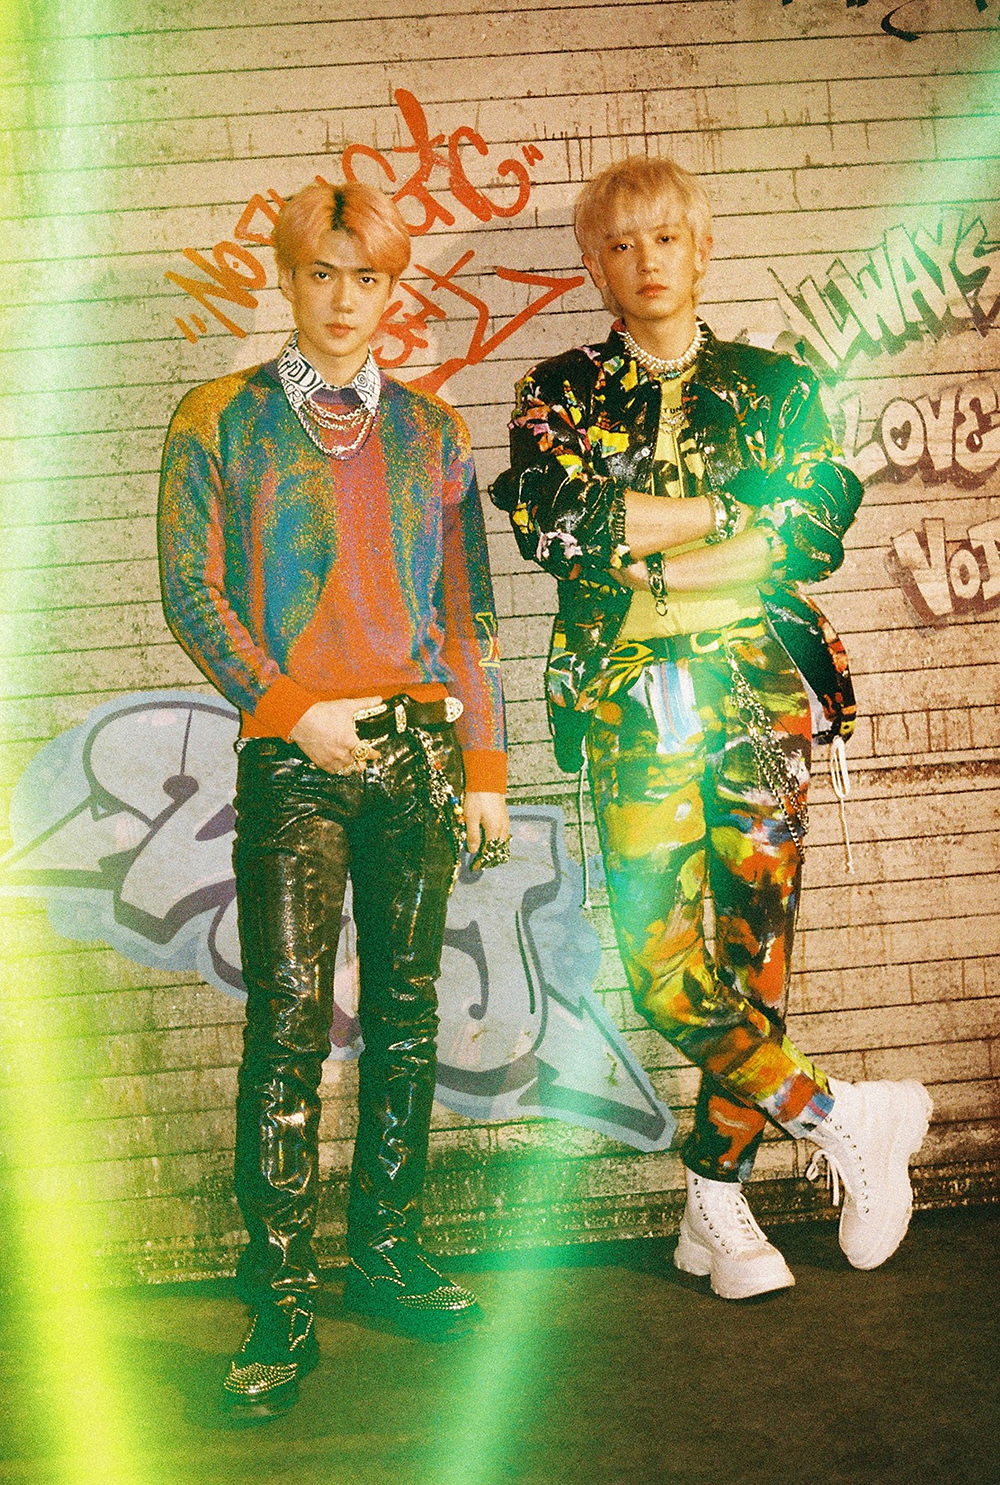 The Amazing Spider-Man 2 Iruvar EXO Sehun & Chanyeols first Regular Album 1 billion View will be unveiled today (13th).Sehun & Chanyeols first regular album 1 billion views will be released at 6 pm today on various music sites such as Flo, Melon, Genie, iTunes, Apple Music, Sporty Pie, QQ Music, Cougu Music, Cougu Music, and Couwer Music. The title song 1 billion views music video will also be released simultaneously through YouTube and Naver TV SMTOWN channels.In particular, the title song 1 billion views is a Hip hop song with an impressive funky guitar sound and disco rhythm. The lyrics likened the mind to the repeated playback of the video, and the vocals of MOON (Moon) participated in the melodic lapping and featuring of Sehun & Chanyeol doubled the charm of the song.In addition, the album also includes Chanyeol Solo songs Nothin (Nat), Sehun Solo songs On Me (On Me), as well as the song Rodeo Station where Sehun & Chanyeol looks back on past memories and current life, and Wings, which tells a genuine story that he has learned in his childhood as an adult.In addition, 9 tracks including Hip hop song Say It (Say It), R & B Hip hop song Disaster Adaptation expressing longing for the distance and distance away from each other, light hip hop song Chuck, title song 1 billion view instrumental version, Yes, its enough to meet the unique music colours of Sehun & Chanyeol.iMBC Cha Hye-mi  Photos